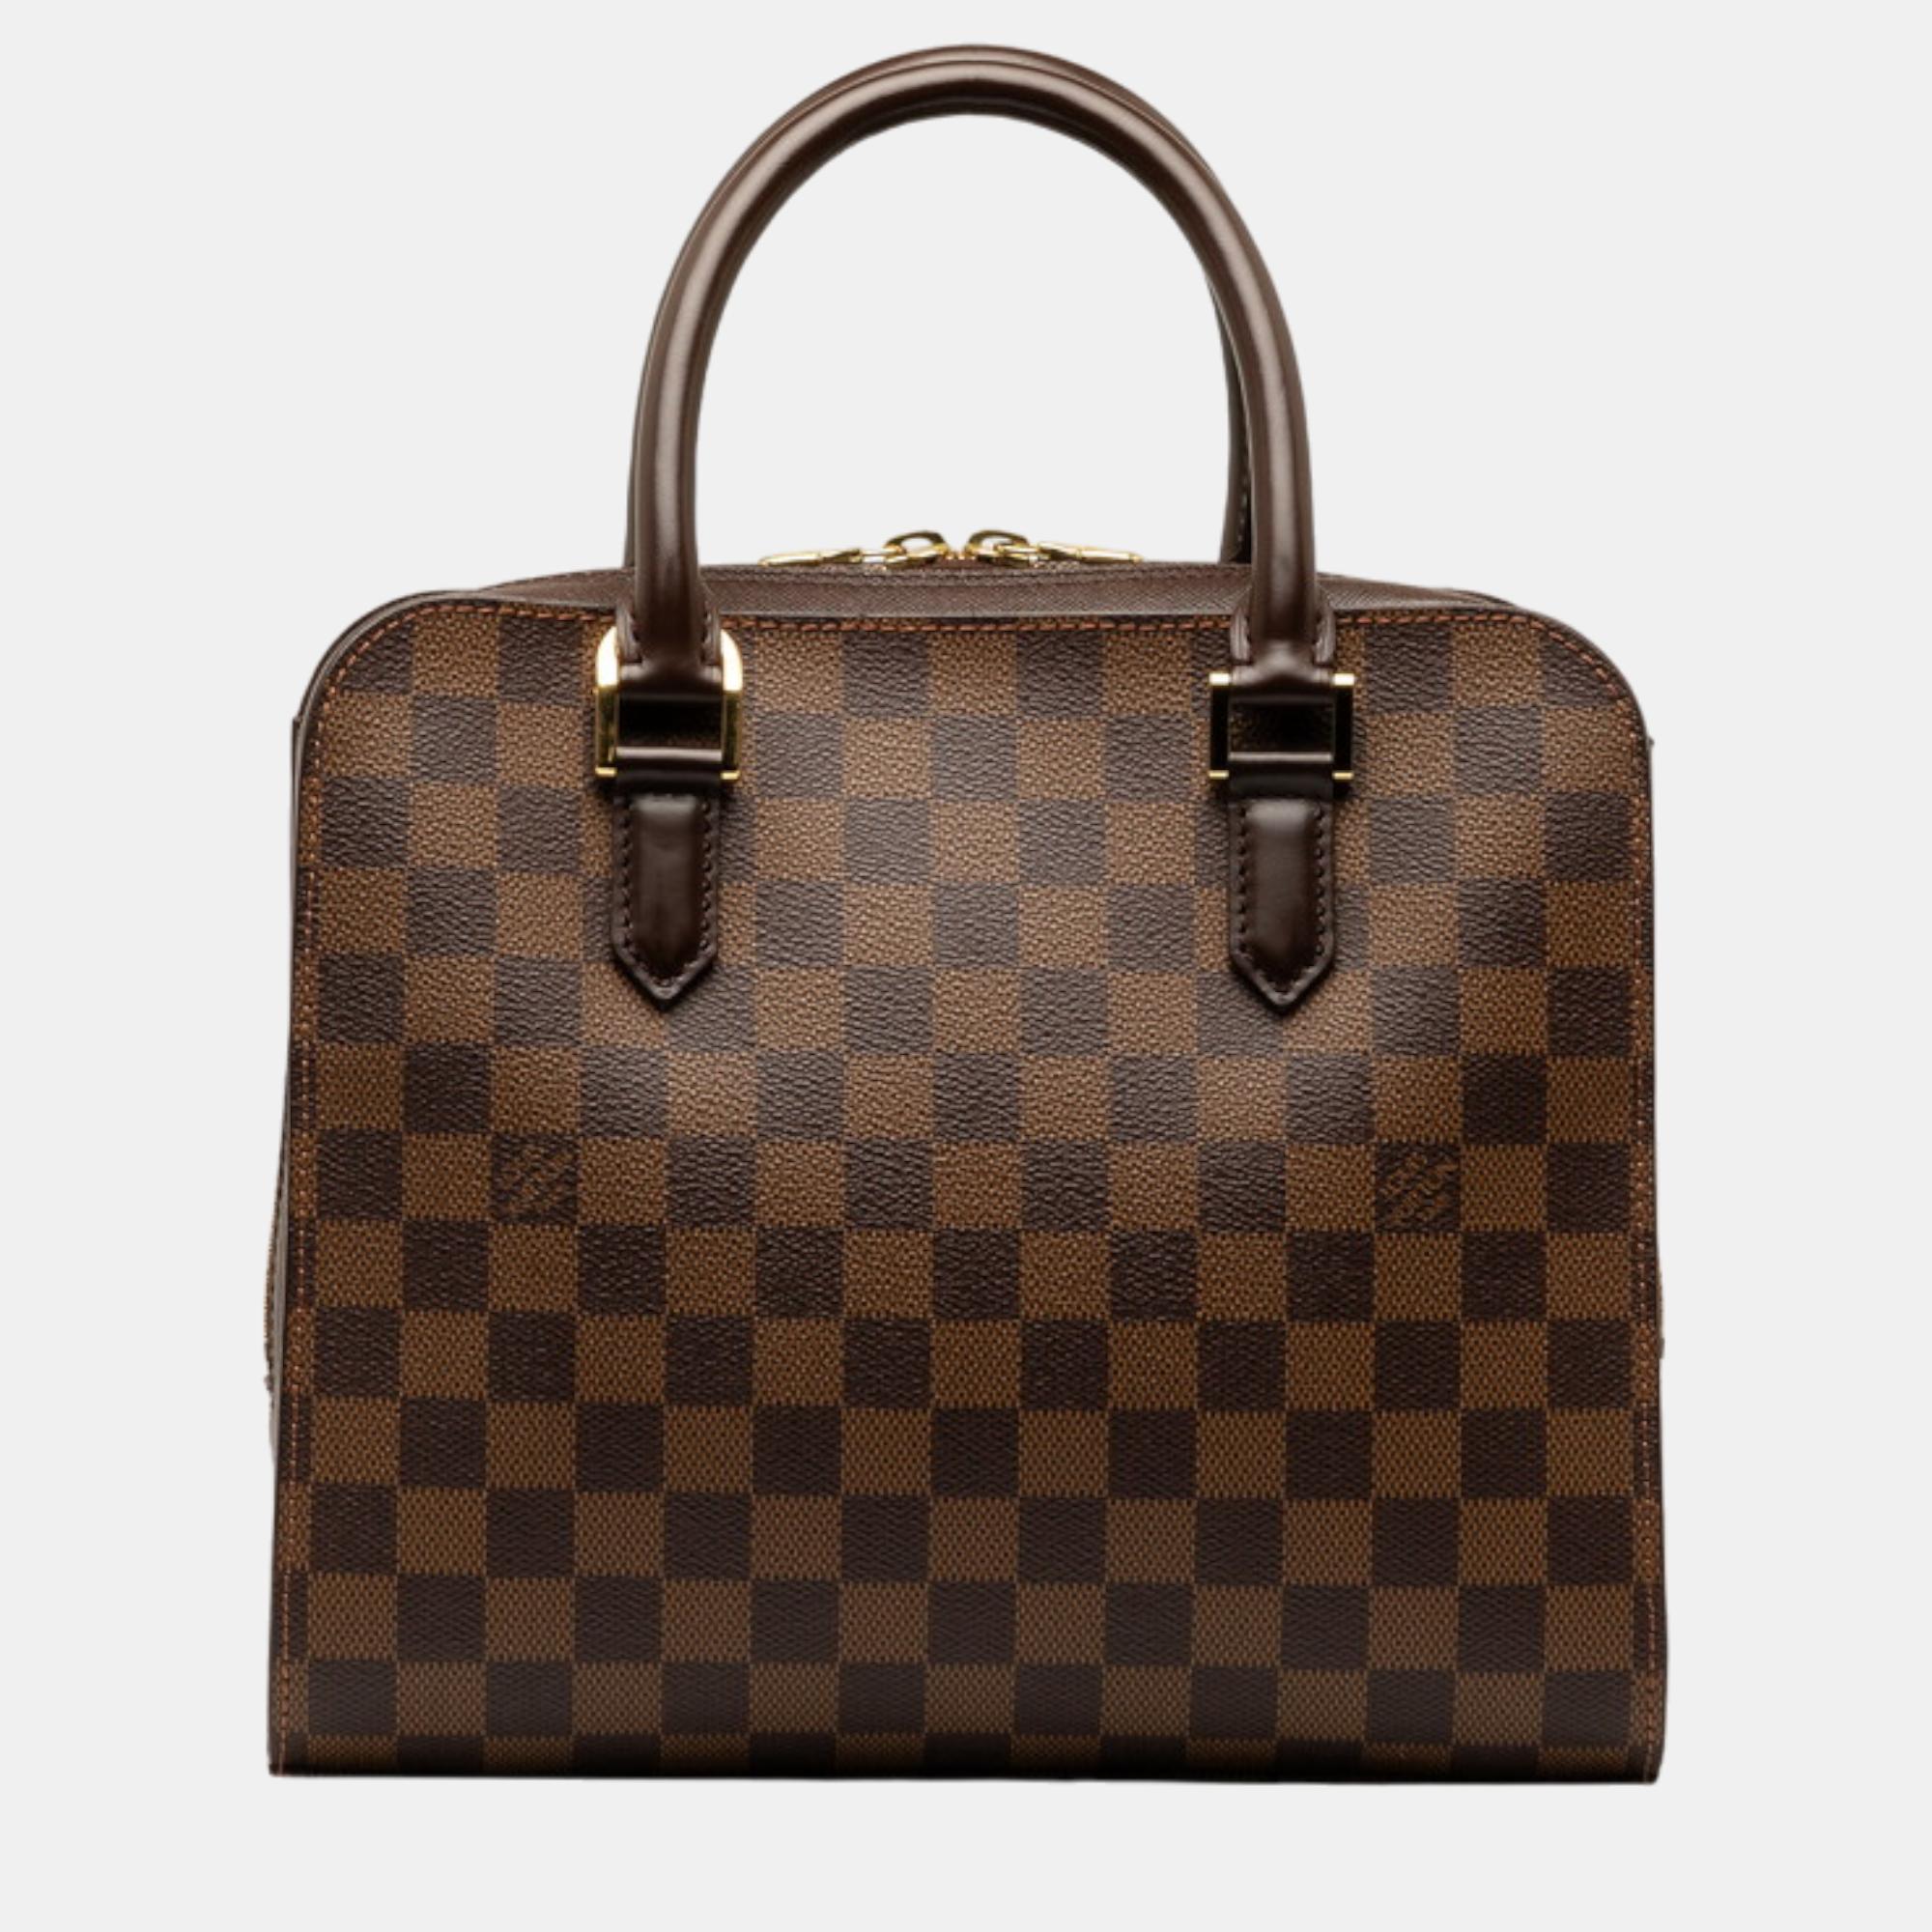 Louis vuitton brown damier ebene canvas and leather triana satchel